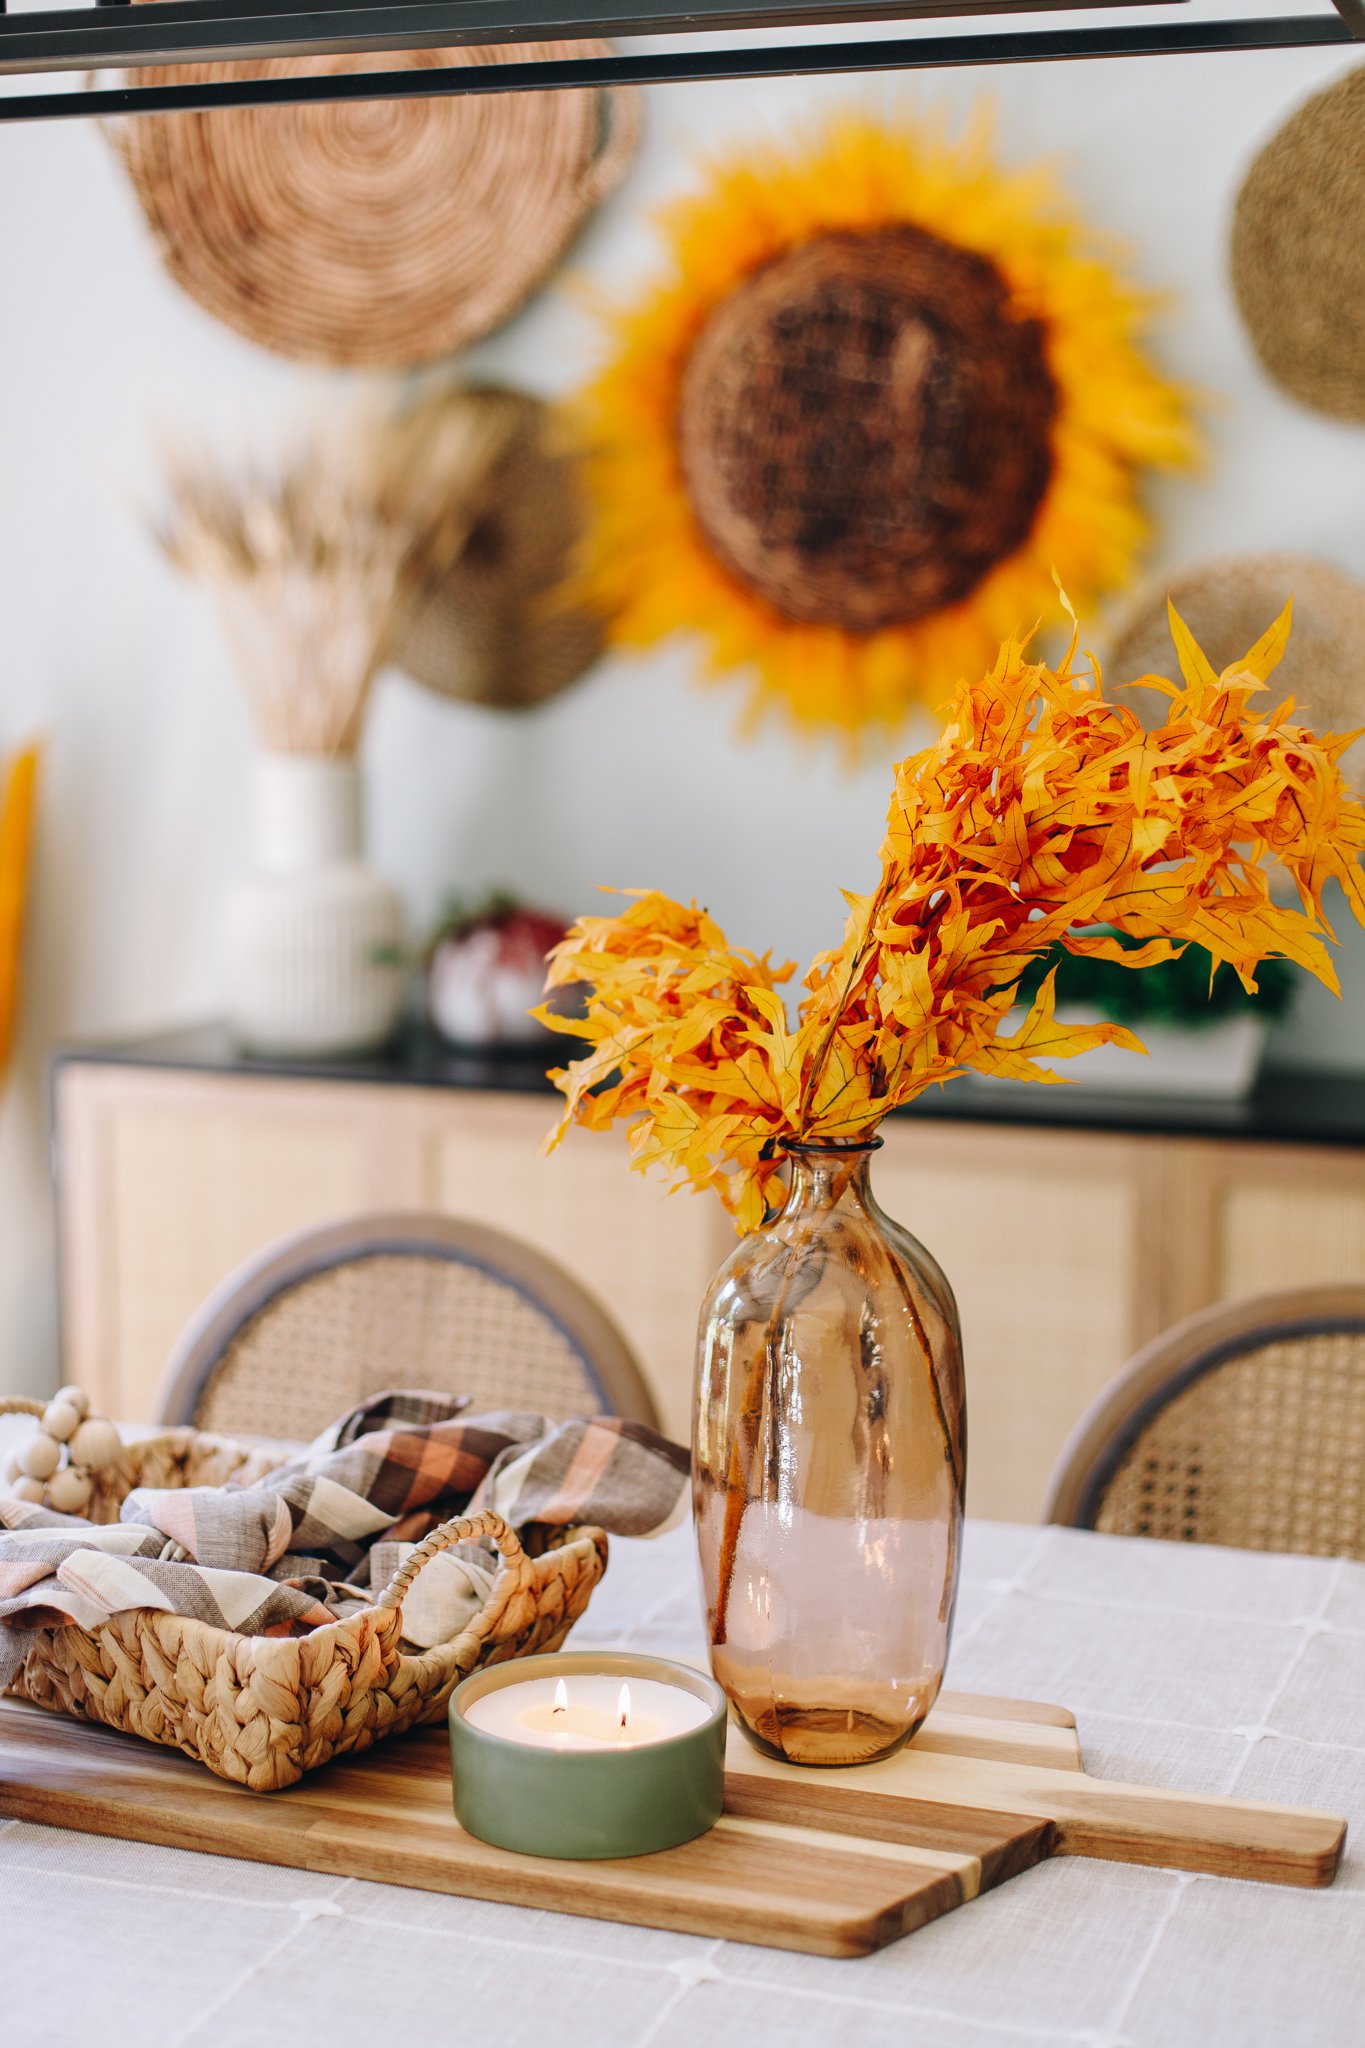 decorate your home for fall with dried naturals to revamp your decor